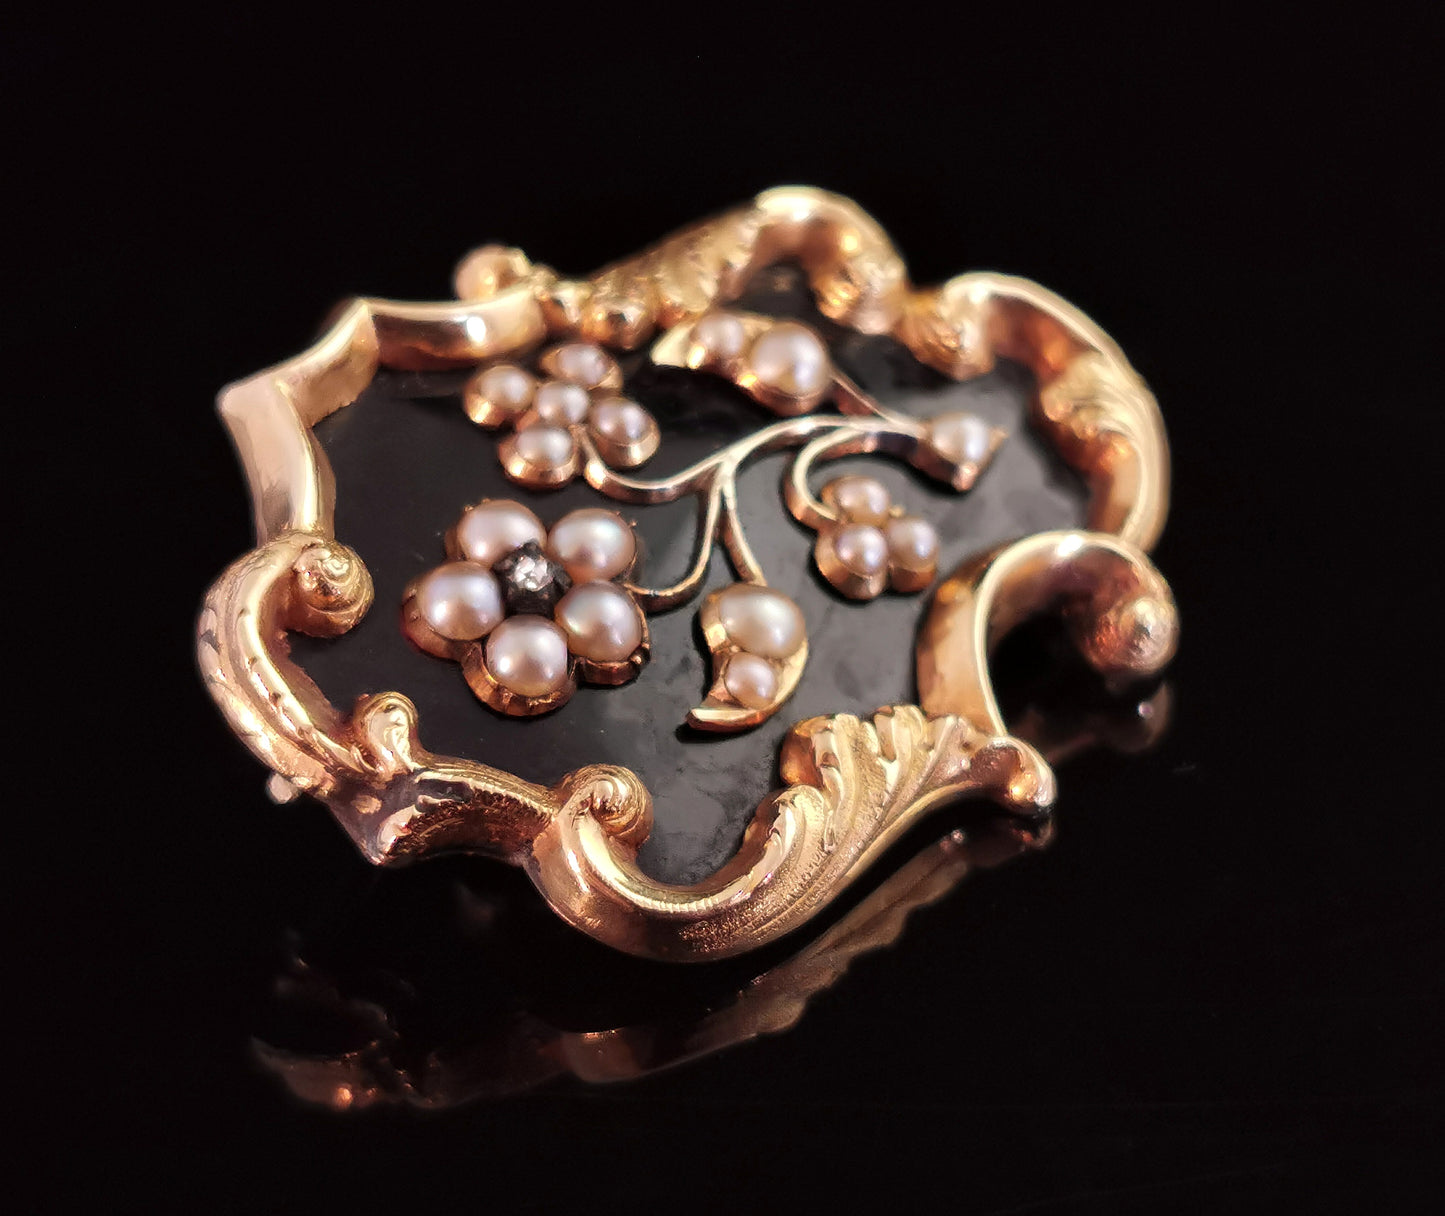 Antique Victorian mourning brooch, Pearl, Diamond and black enamel, Forget me not flower